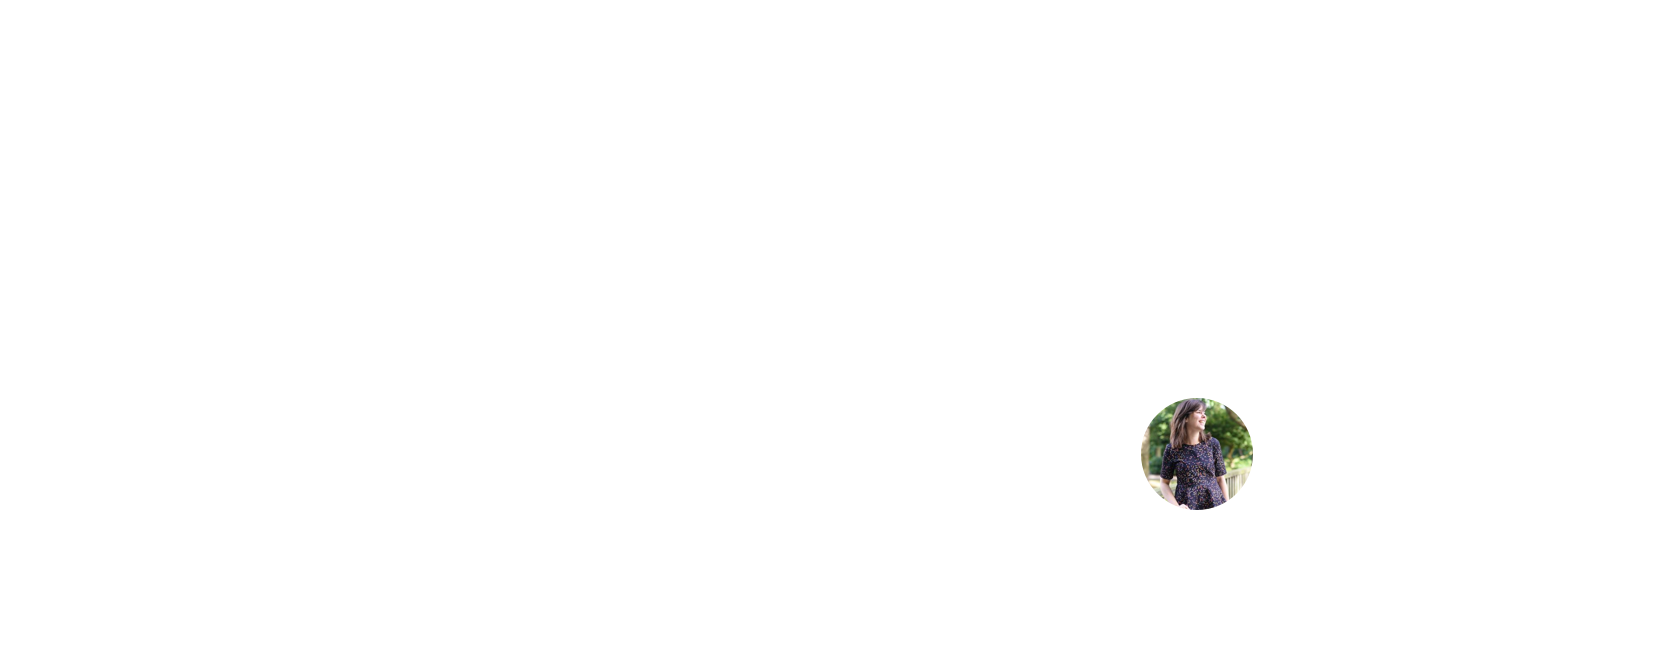 Testimonial The Self-Made Summit 2019 Business Carriere Event Ambitieuze Zakenvrouwen Freelancers Melle Bouwhuis.png